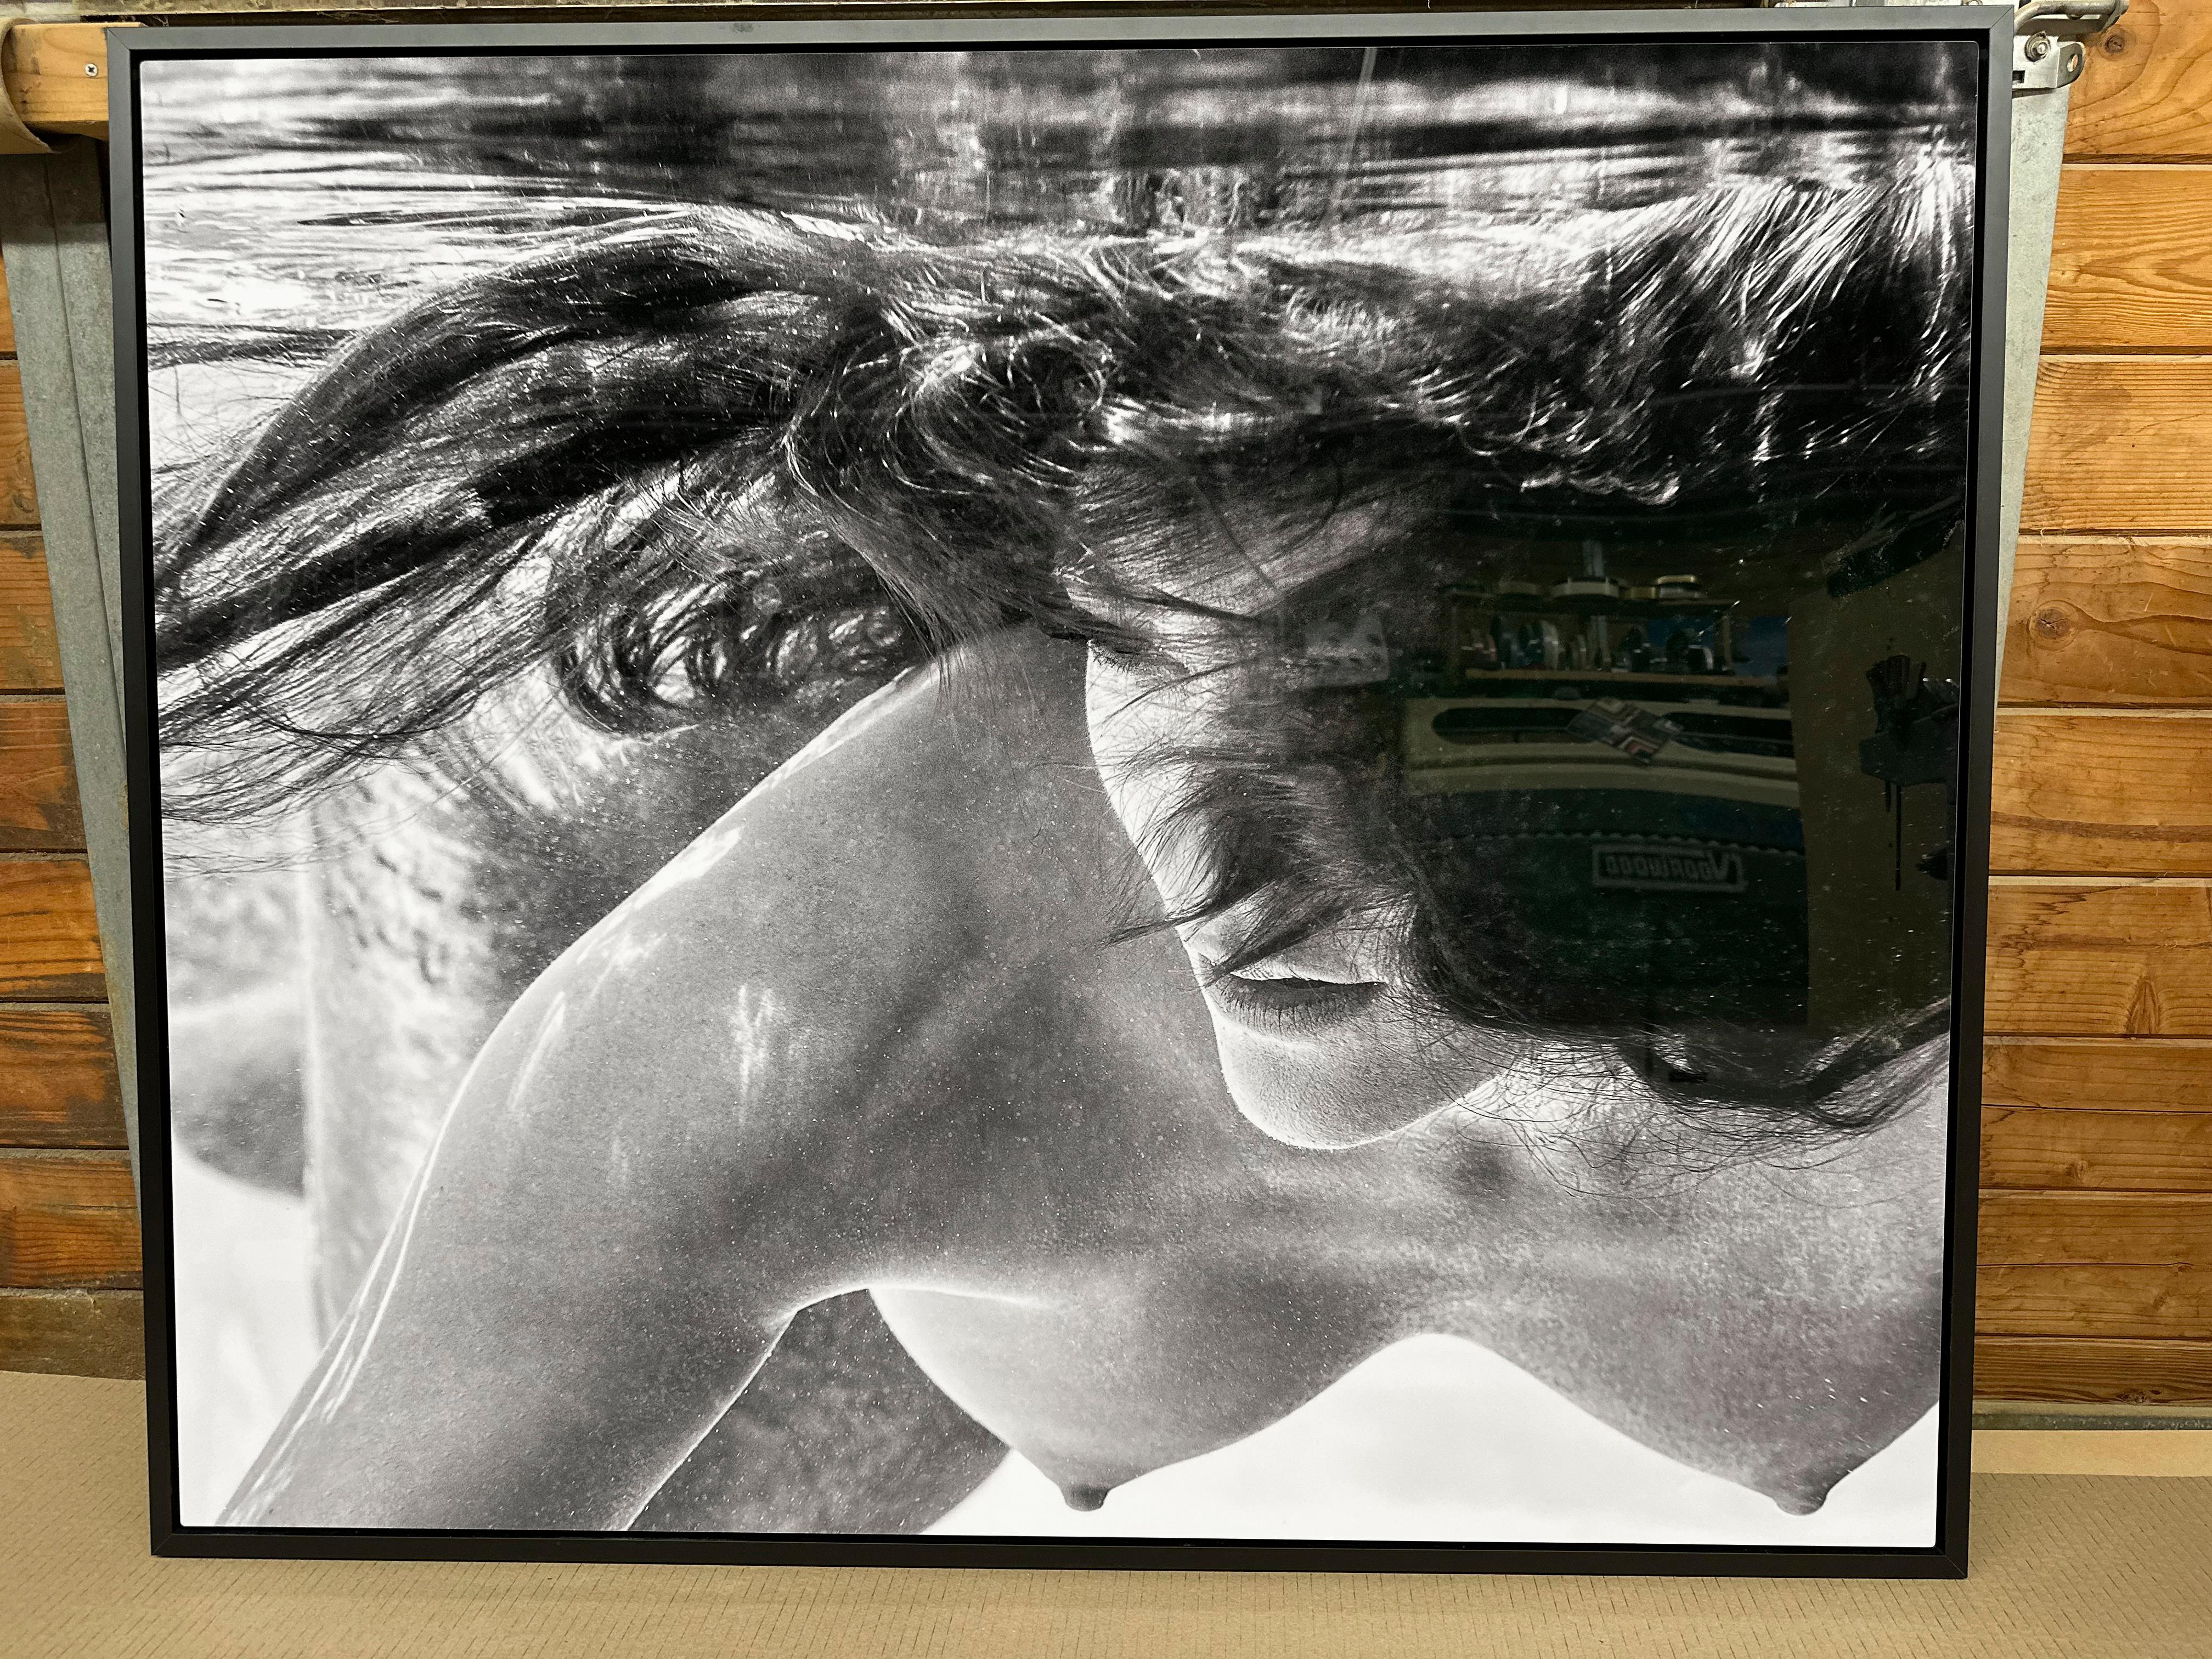 An underwater black and white photograph of a beautiful topless young woman, Apriel swimming in the pool. 

Original digital print on aluminum plate signed by the artist.
Limited edition of 12, print #2.
The artwork is furnished with certificate of